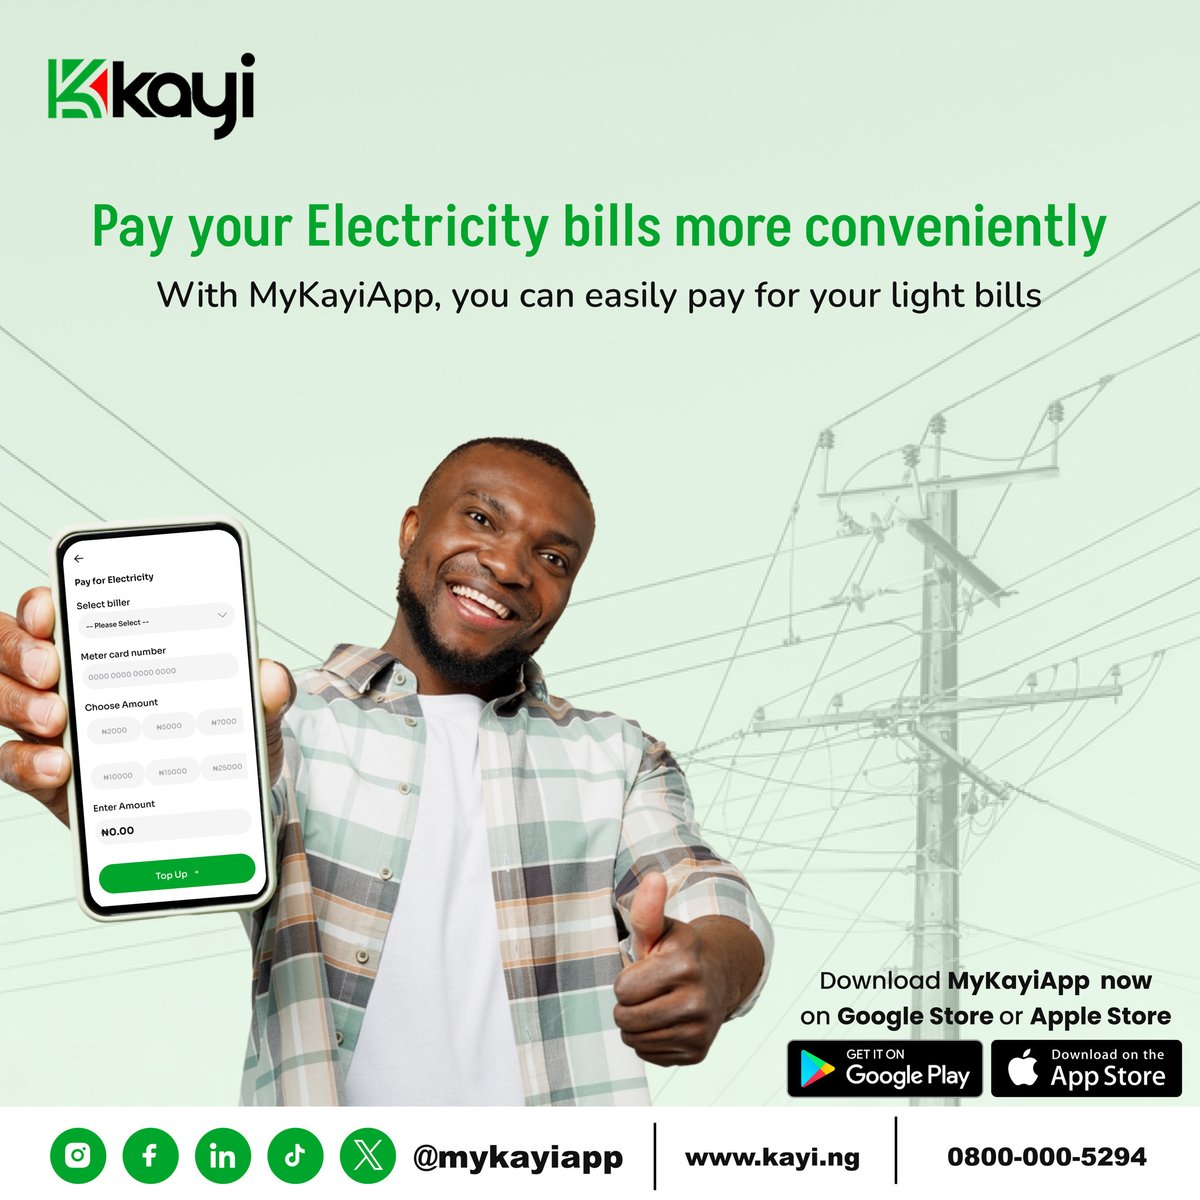 Bringing city convenience to rural homes! With Kayiapp, paying electricity bills is now a breeze, no matter where you are. Experience the ease of managing your bills right from your fingertips!

#MyKayiapp #RuralConvenience 
#EasyBills
#Kayiway
#Digitalbanking